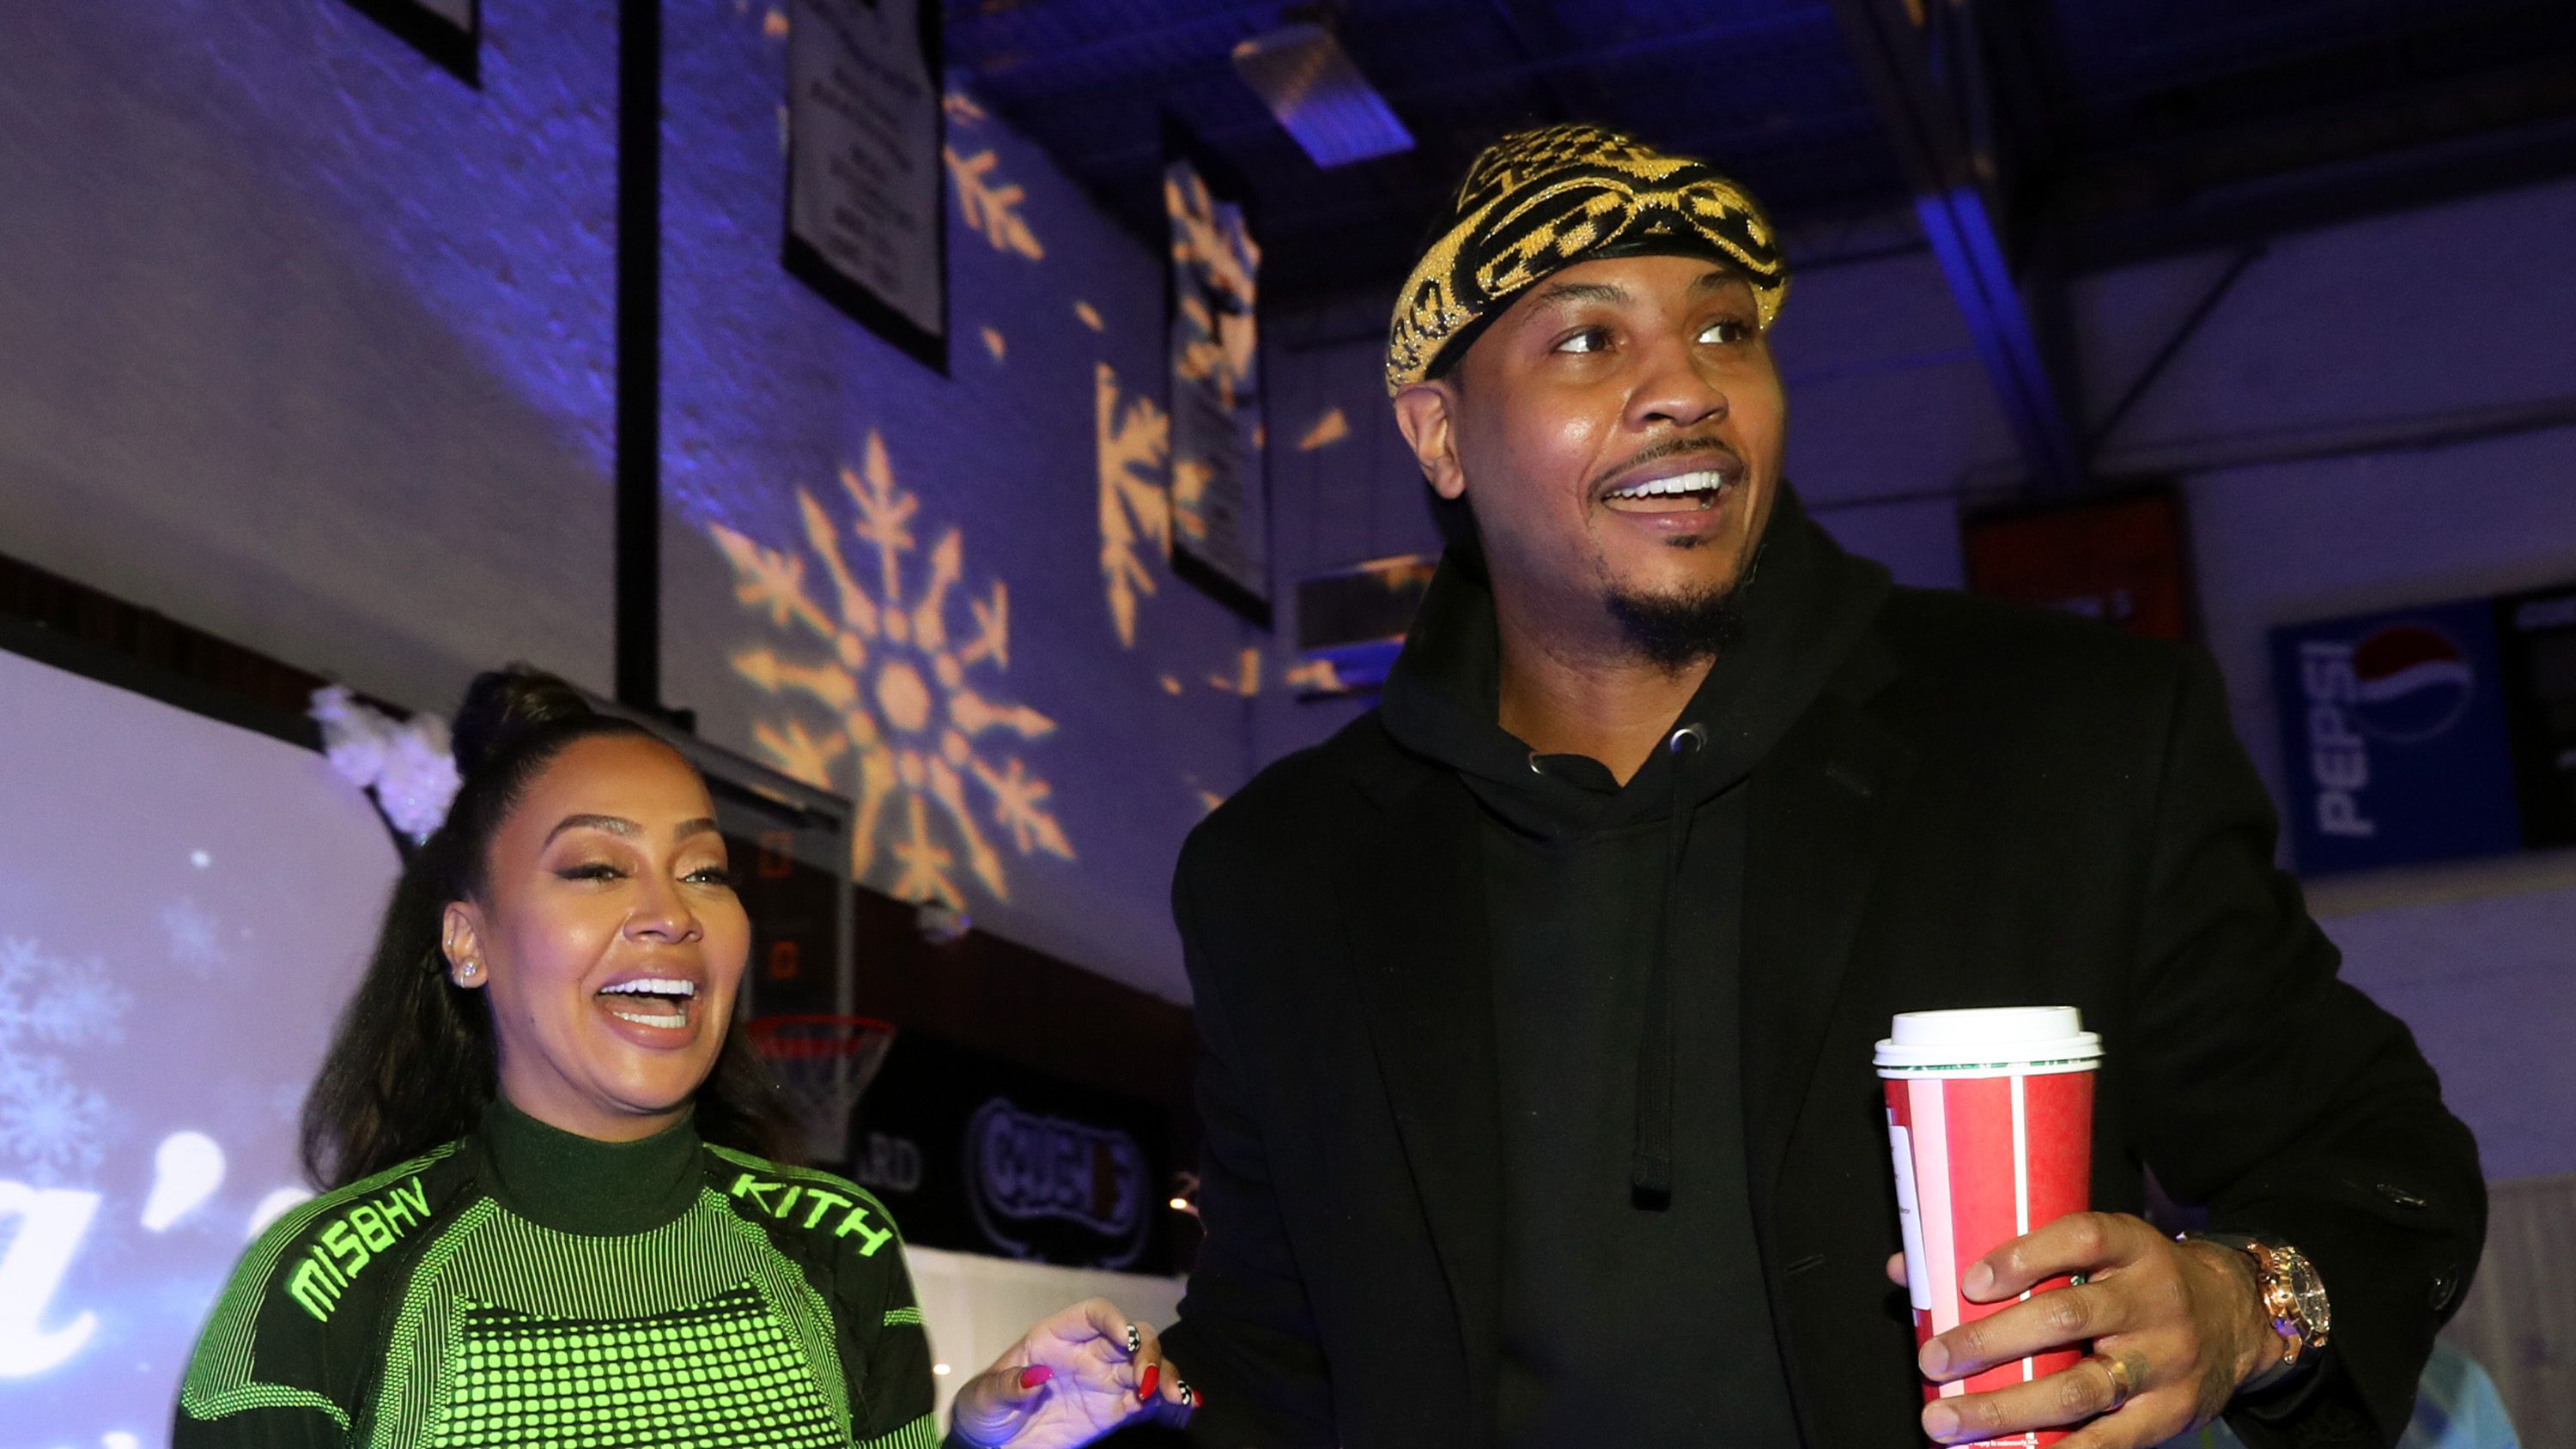 La La Anthony Reveals the Demise of Her & Carmelo Anthony's Marriage